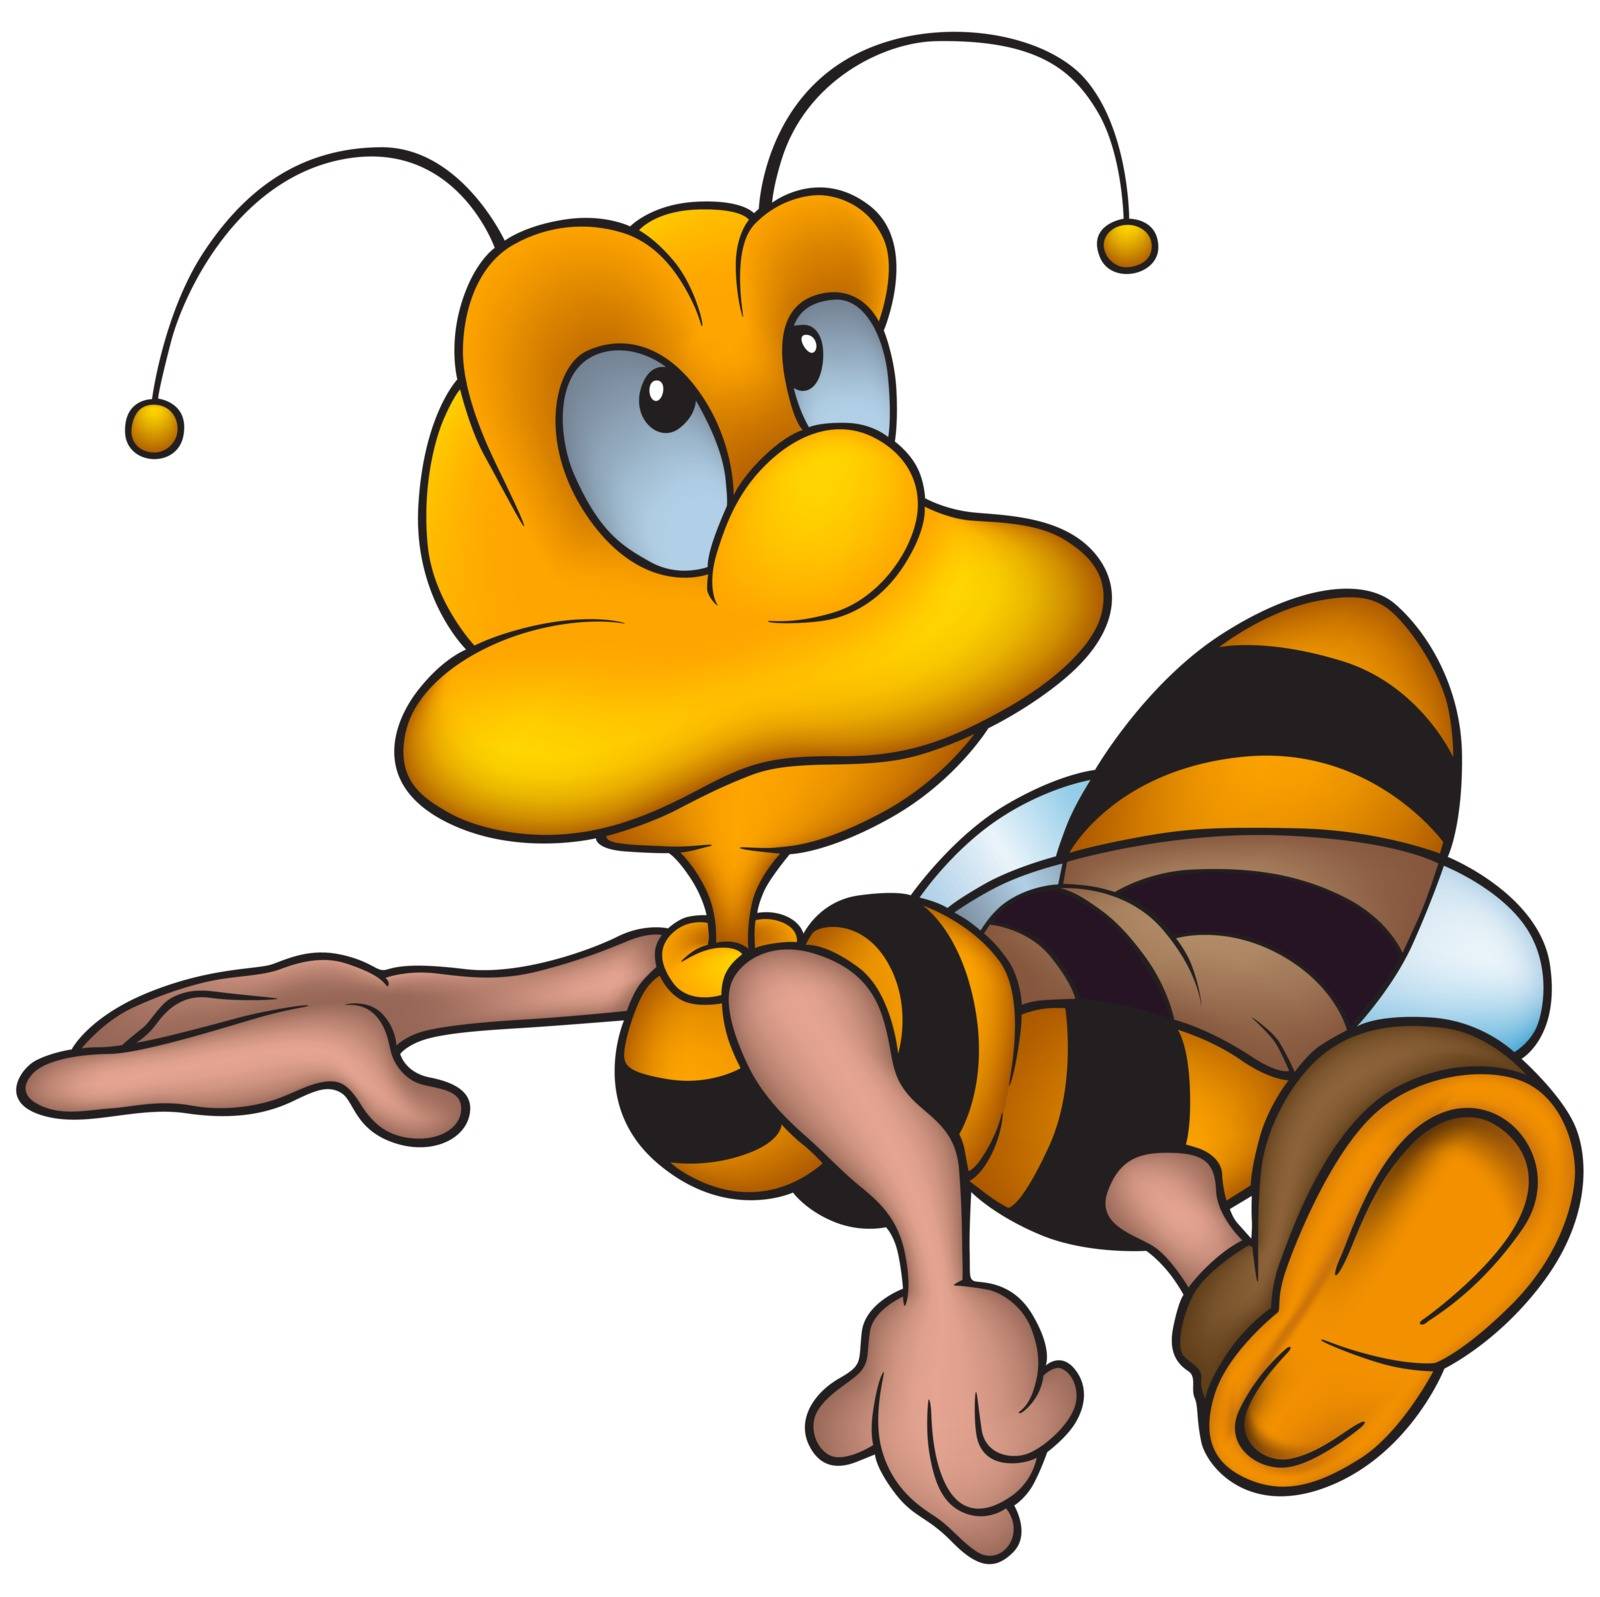 Clever Wasp - Colored Cartoon Illustration, Vector